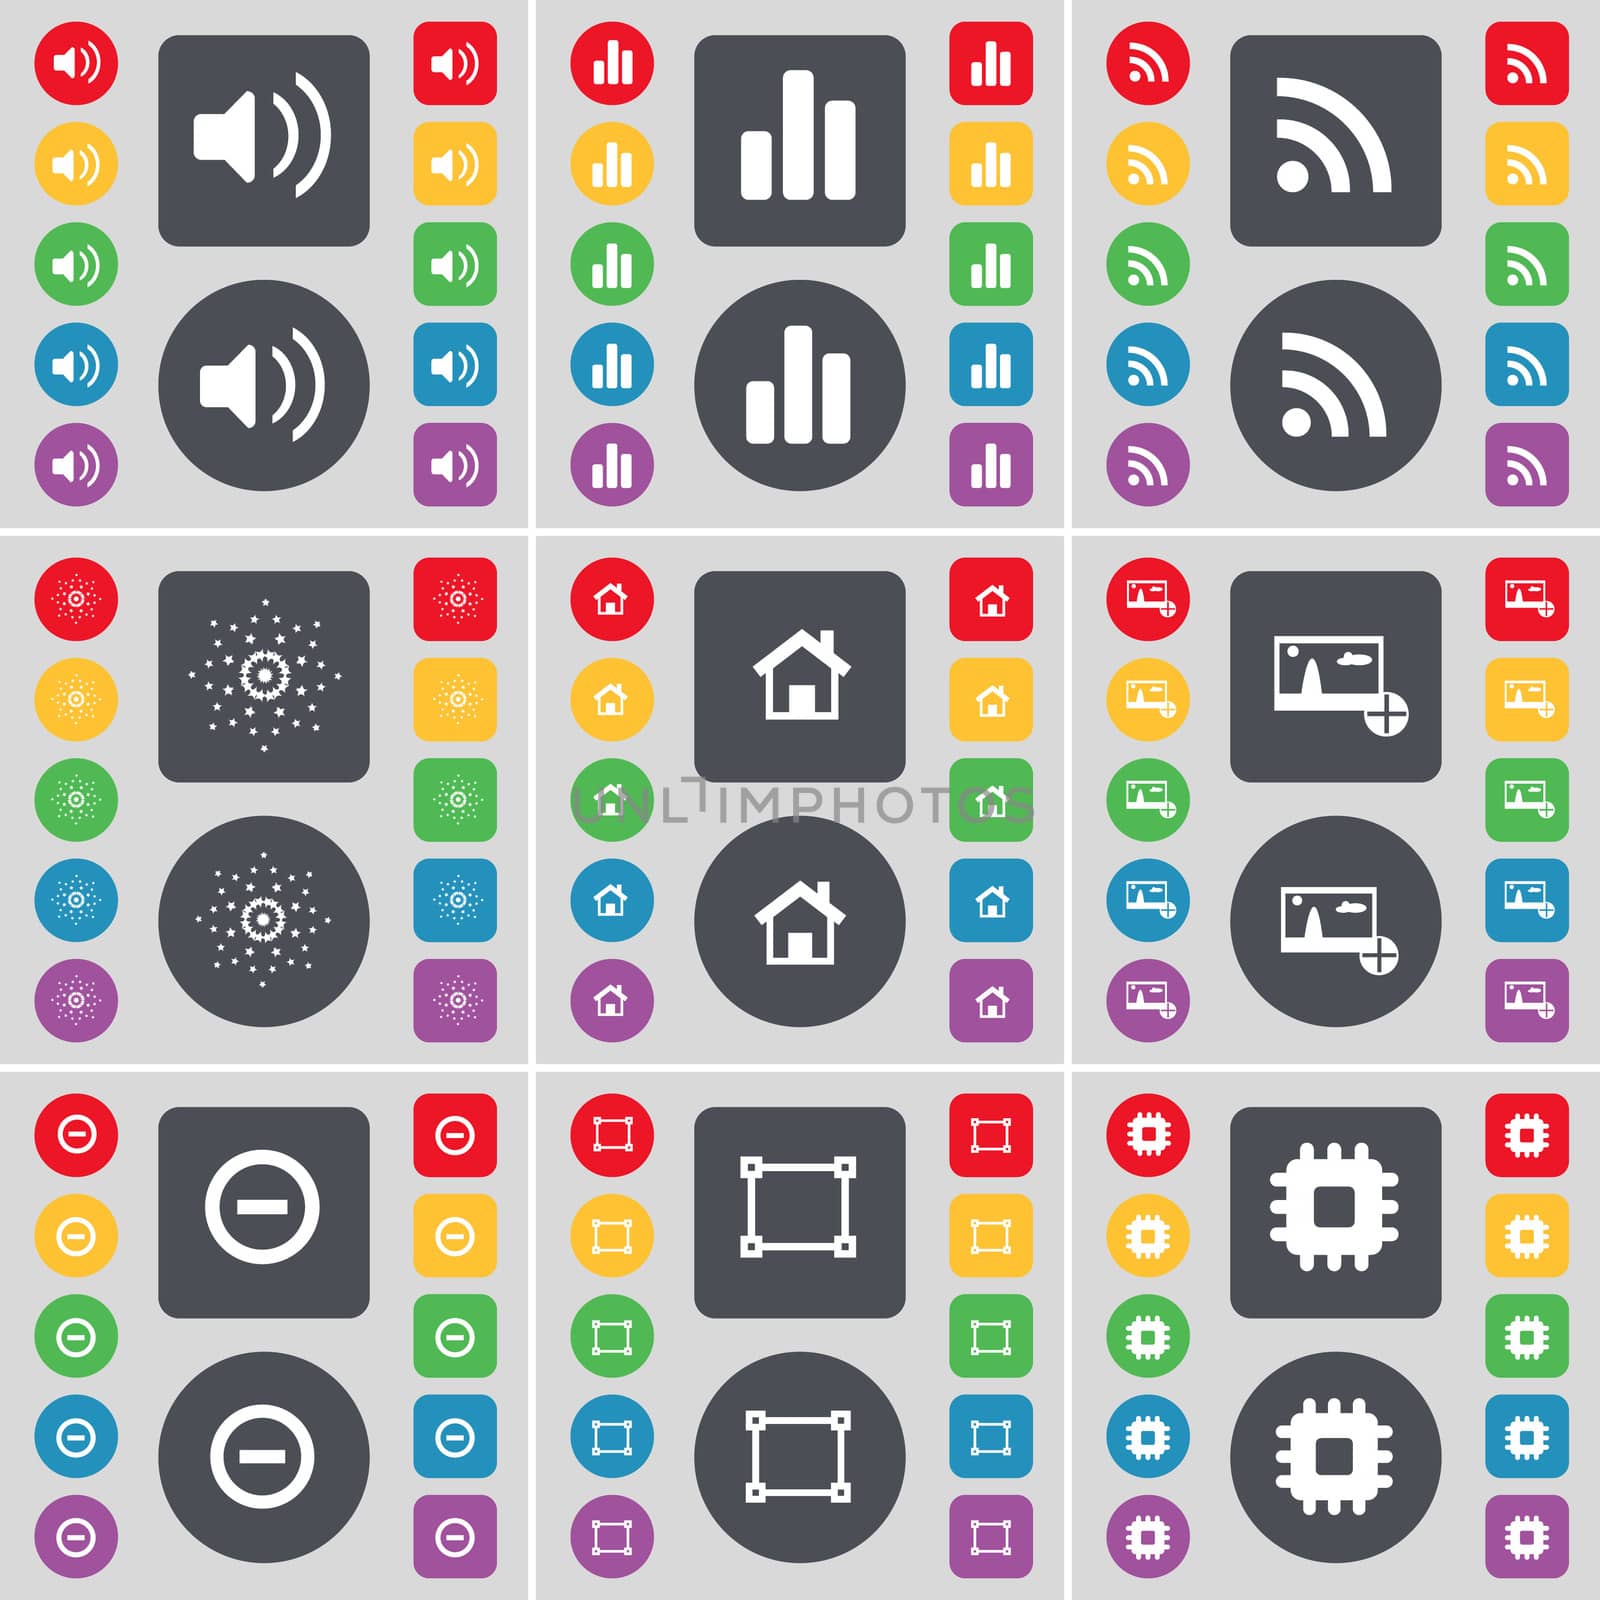 Sound, Diagram, RSS, Star, House, Picture, Minus, Frame, Processor icon symbol. A large set of flat, colored buttons for your design.  by serhii_lohvyniuk